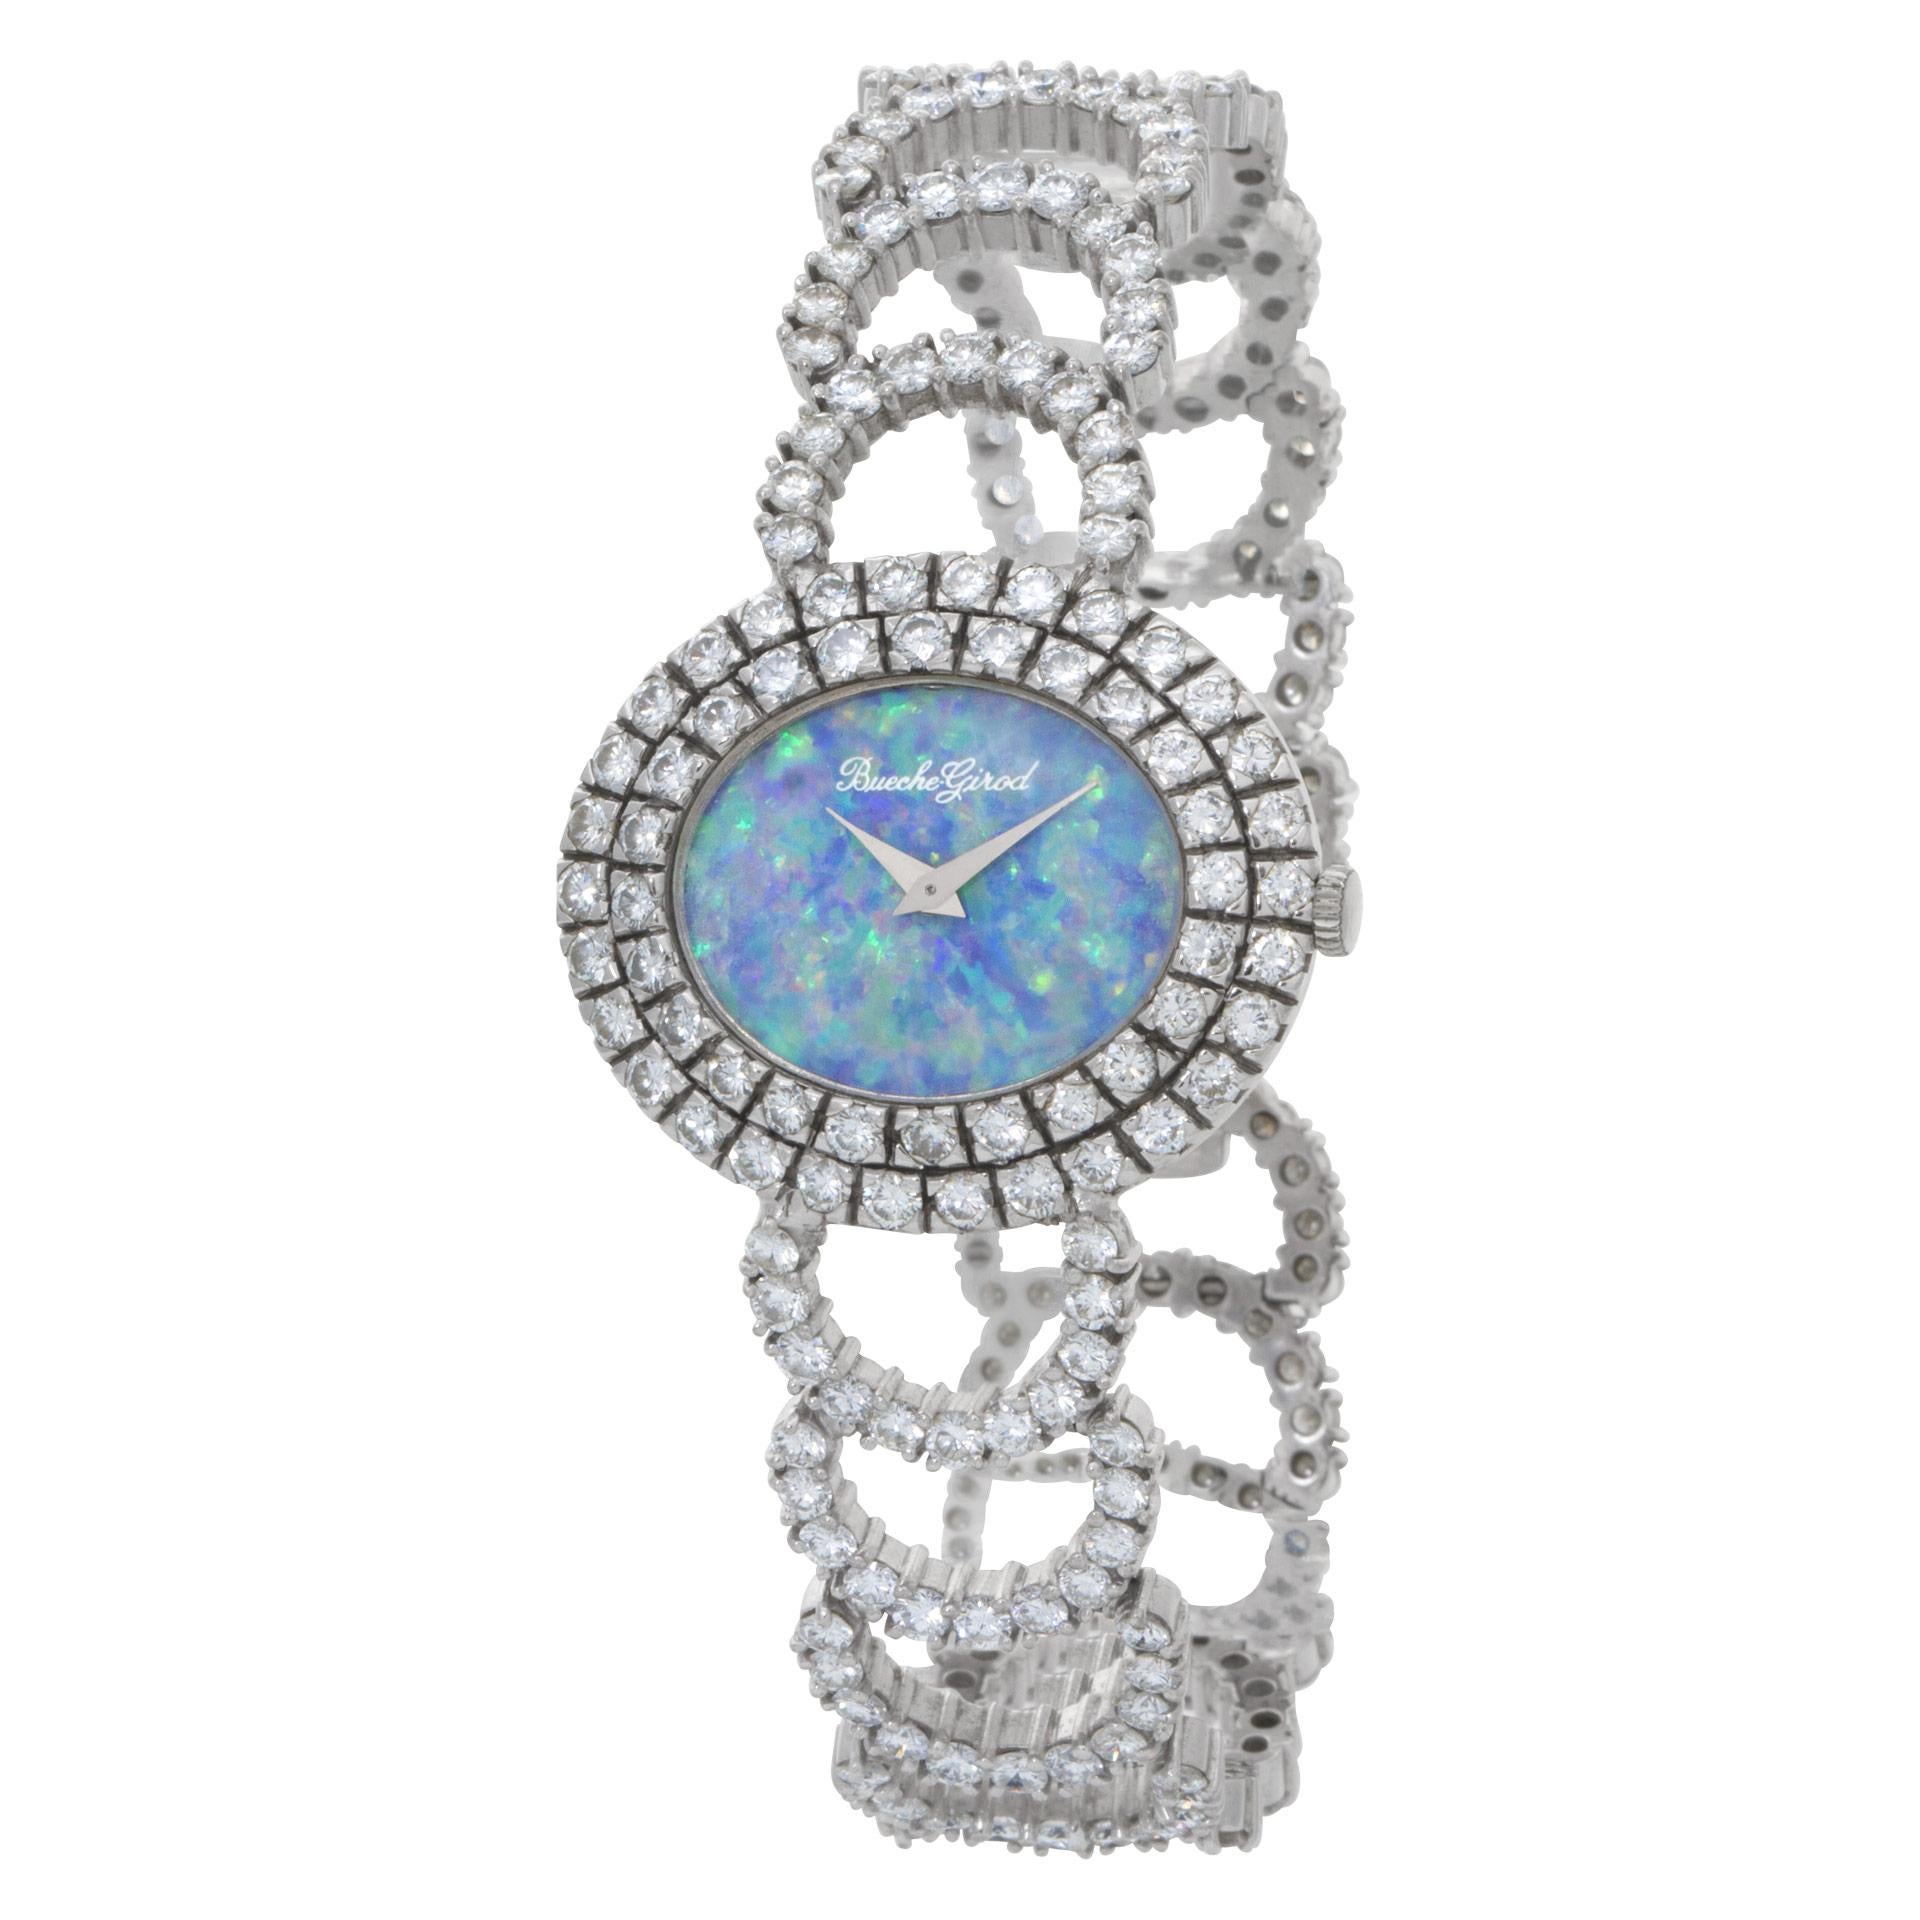 Colorful Australian Fire opal dial Bueche Girod diamond cocktail watch in 18k white gold with approx. 13.5 cts in diamonds. Manual. 31 mm case size. Fits 6.75 inches wrist. Ref 9801. Circa 1970s. Fine Pre-owned Bueche Girod Watch. Certified preowned